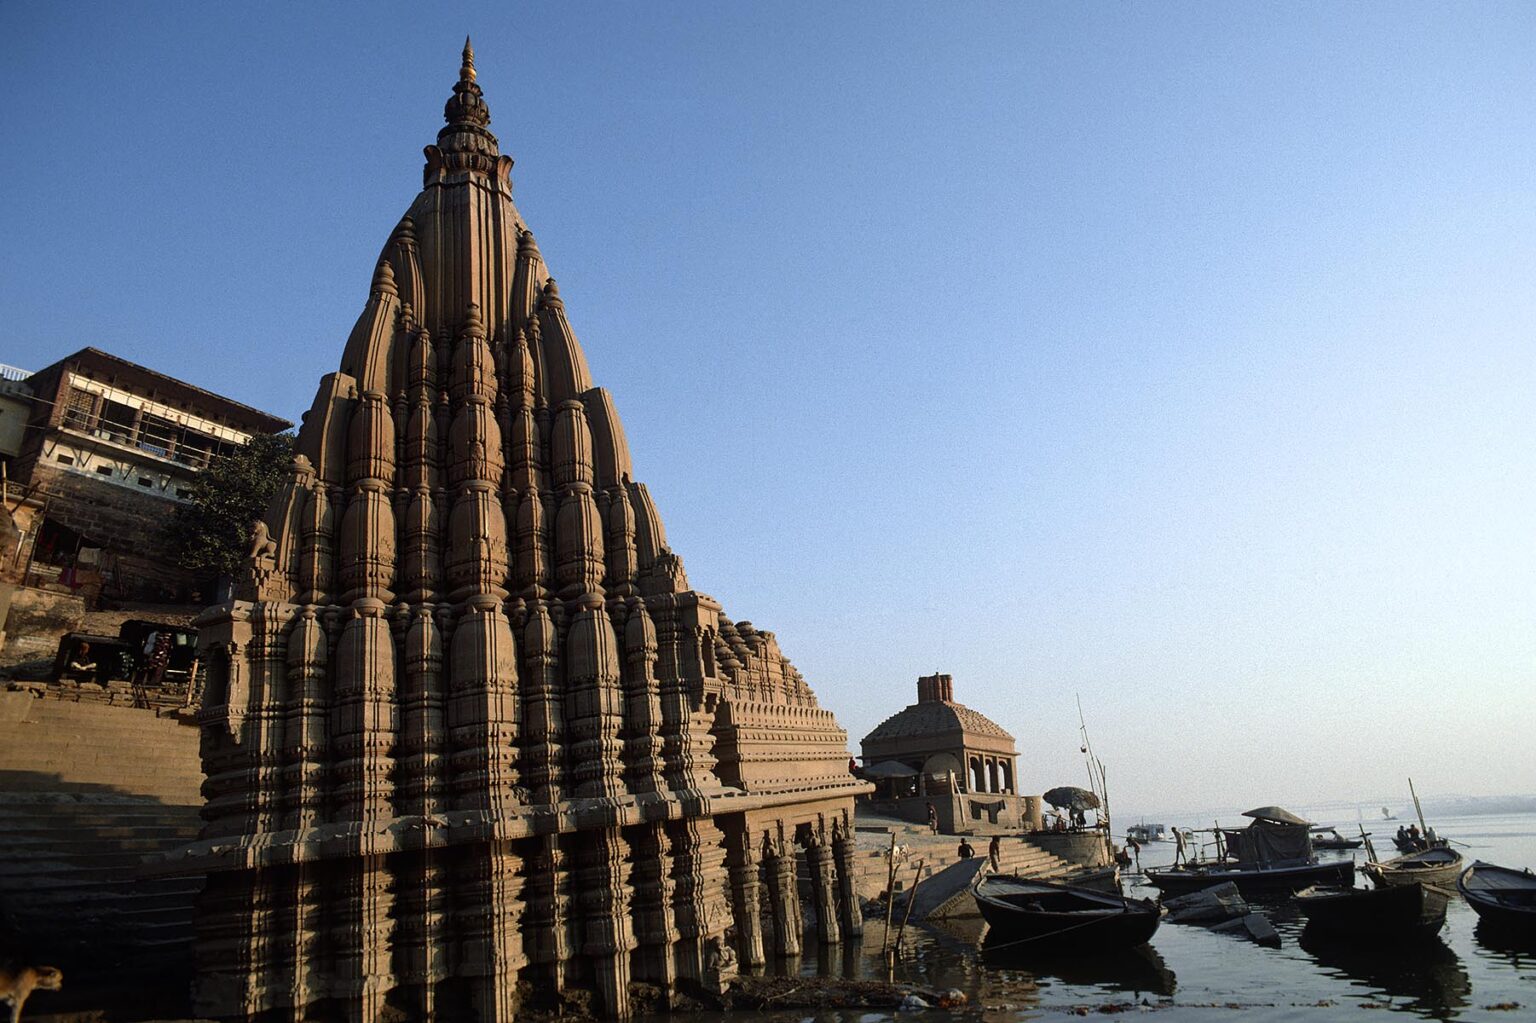 A HINDU TEMPLE rises above CANOES on the GANGES RIVER - VARANASI (BENARES), INDIA